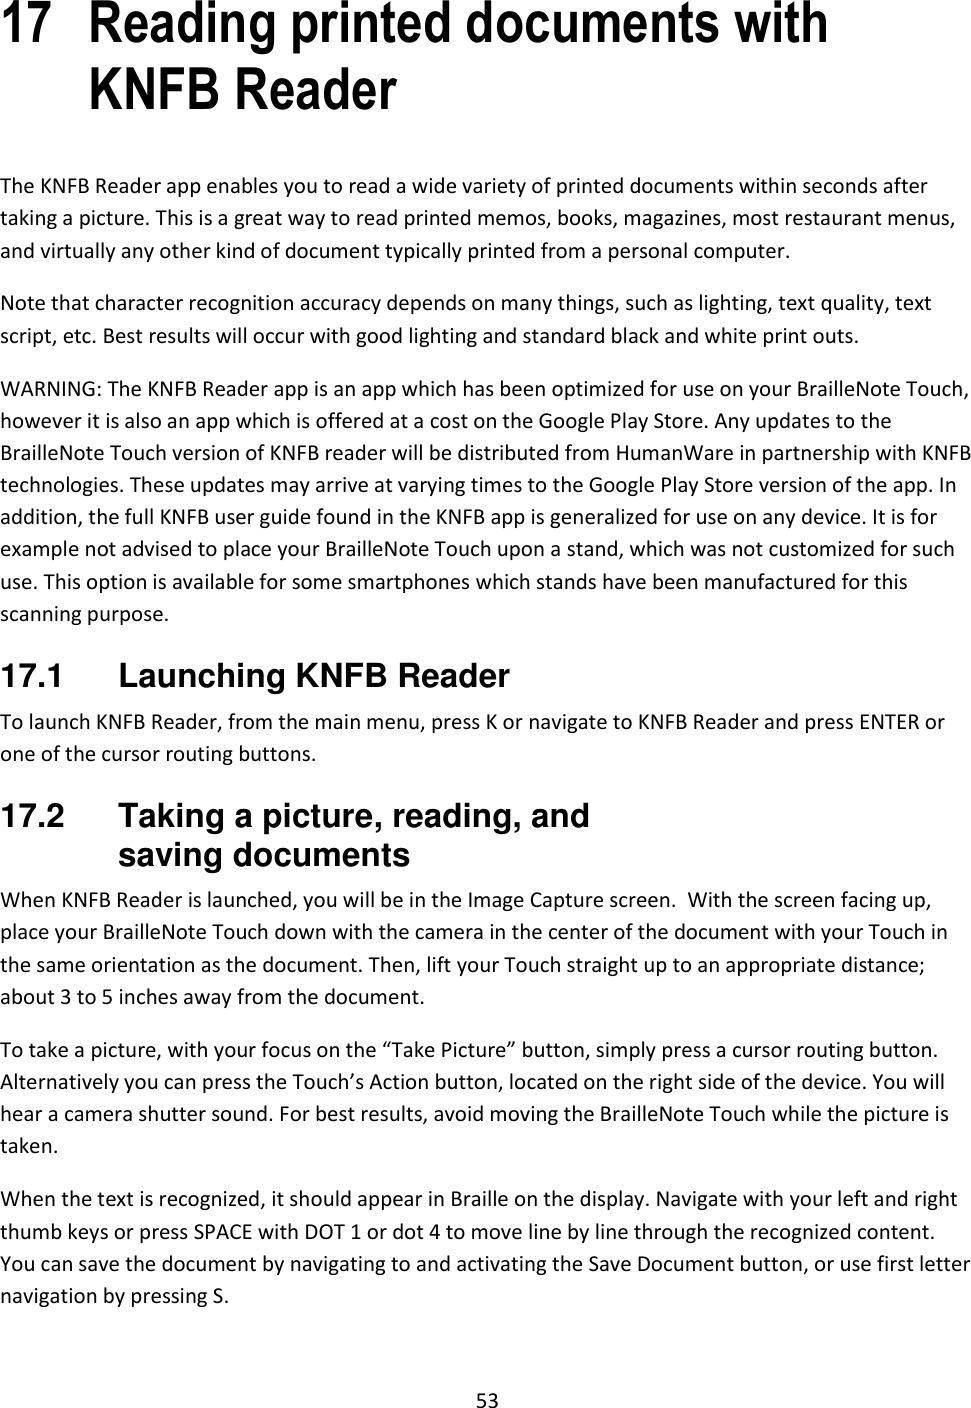 53 17 Reading printed documents with KNFB Reader The KNFB Reader app enables you to read a wide variety of printed documents within seconds after taking a picture. This is a great way to read printed memos, books, magazines, most restaurant menus, and virtually any other kind of document typically printed from a personal computer. Note that character recognition accuracy depends on many things, such as lighting, text quality, text script, etc. Best results will occur with good lighting and standard black and white print outs. WARNING: The KNFB Reader app is an app which has been optimized for use on your BrailleNote Touch, however it is also an app which is offered at a cost on the Google Play Store. Any updates to the BrailleNote Touch version of KNFB reader will be distributed from HumanWare in partnership with KNFB technologies. These updates may arrive at varying times to the Google Play Store version of the app. In addition, the full KNFB user guide found in the KNFB app is generalized for use on any device. It is for example not advised to place your BrailleNote Touch upon a stand, which was not customized for such use. This option is available for some smartphones which stands have been manufactured for this scanning purpose. 17.1  Launching KNFB Reader To launch KNFB Reader, from the main menu, press K or navigate to KNFB Reader and press ENTER or one of the cursor routing buttons.  17.2  Taking a picture, reading, and saving documents When KNFB Reader is launched, you will be in the Image Capture screen.  With the screen facing up, place your BrailleNote Touch down with the camera in the center of the document with your Touch in the same orientation as the document. Then, lift your Touch straight up to an appropriate distance; about 3 to 5 inches away from the document. To take a picture, with your focus on the “Take Picture” button, simply press a cursor routing button. Alternatively you can press the Touch’s Action button, located on the right side of the device. You will hear a camera shutter sound. For best results, avoid moving the BrailleNote Touch while the picture is taken. When the text is recognized, it should appear in Braille on the display. Navigate with your left and right thumb keys or press SPACE with DOT 1 or dot 4 to move line by line through the recognized content. You can save the document by navigating to and activating the Save Document button, or use first letter navigation by pressing S.  